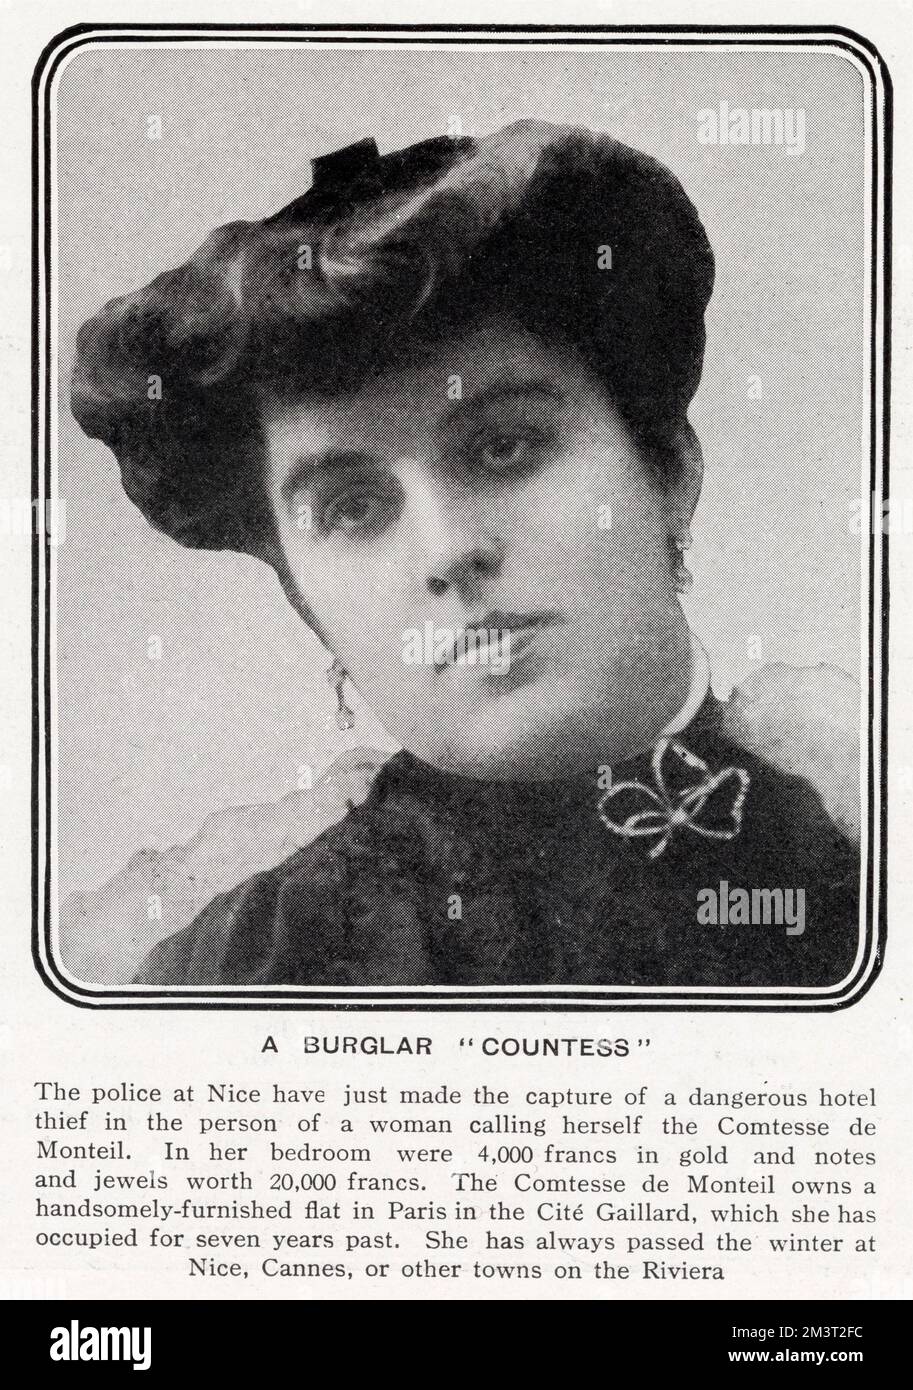 A burglar 'countess'. The police at Nice have just made the capture of a dangerous hotel thief in the person of a woman calling herself the Comtesse de Monteil. In her bedroom were 4000 francs in gold and notes and jewels worth 20,000 francs. The Comtesse de Monteil owns a handsomely-furnished flat in Paris. She has always passed the winter at Nice, Cannes, or other towns on the Riviera. Stock Photo